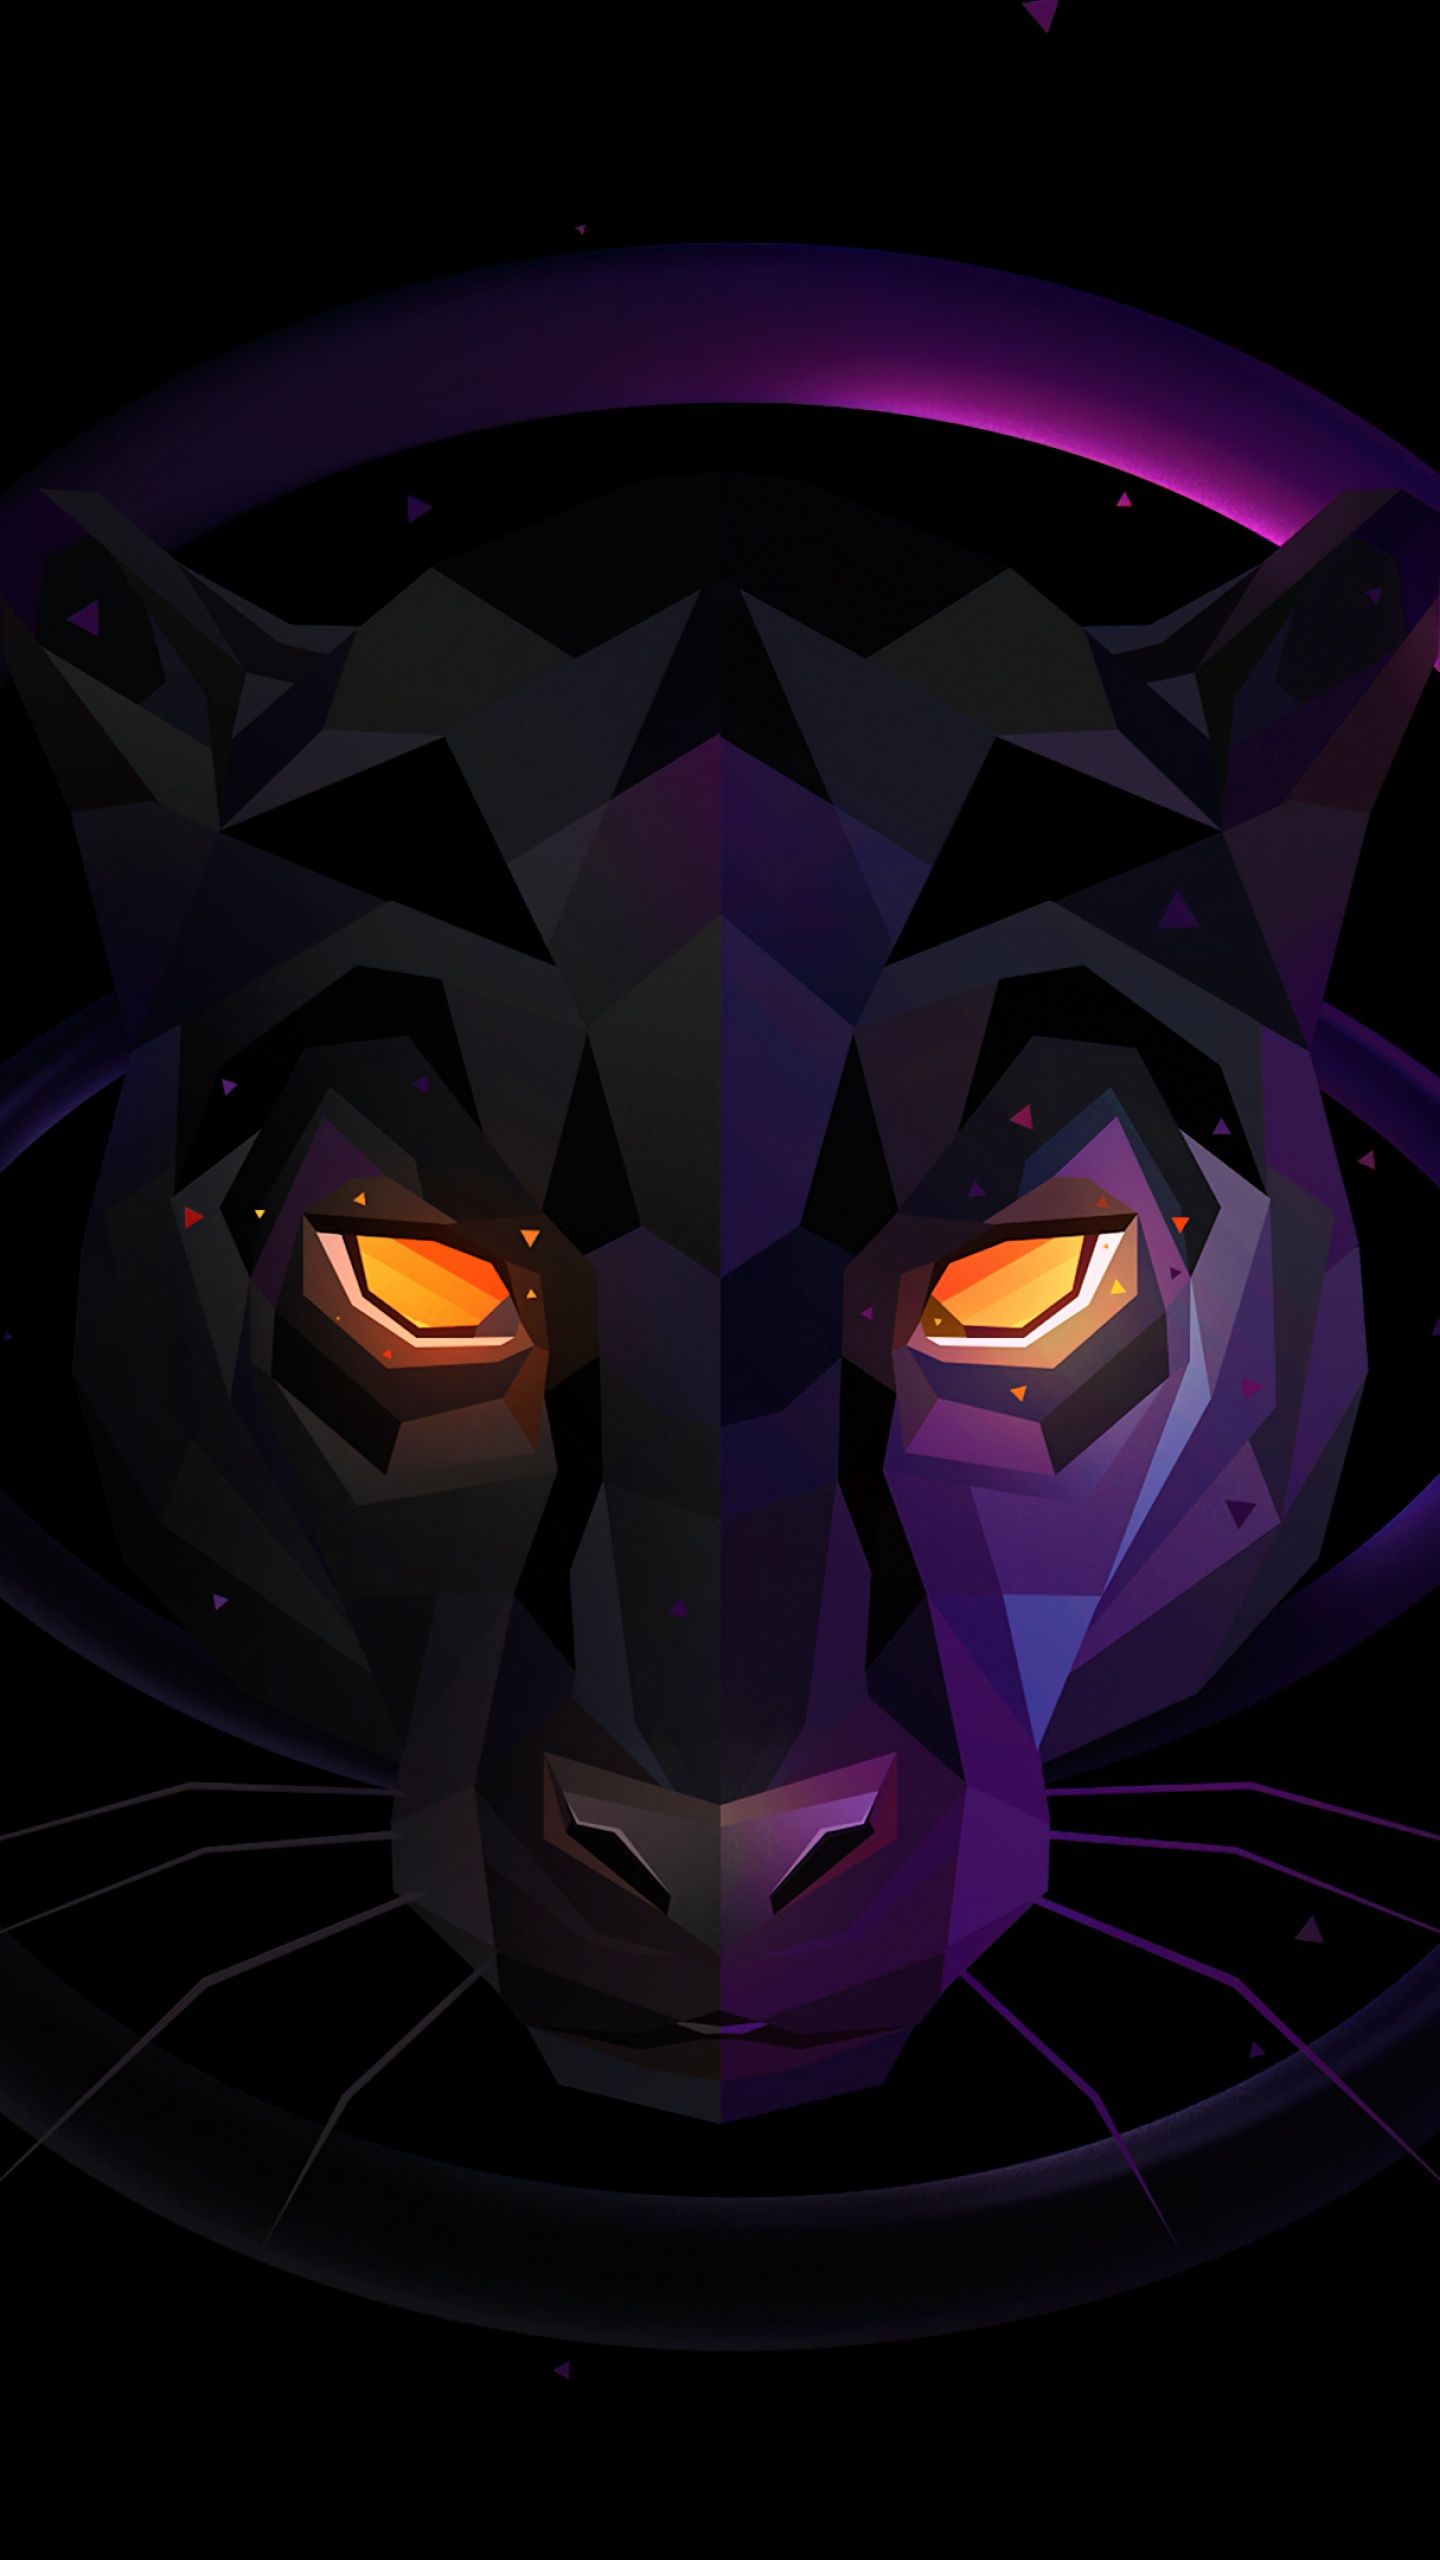 A black cat with glowing eyes - Low poly